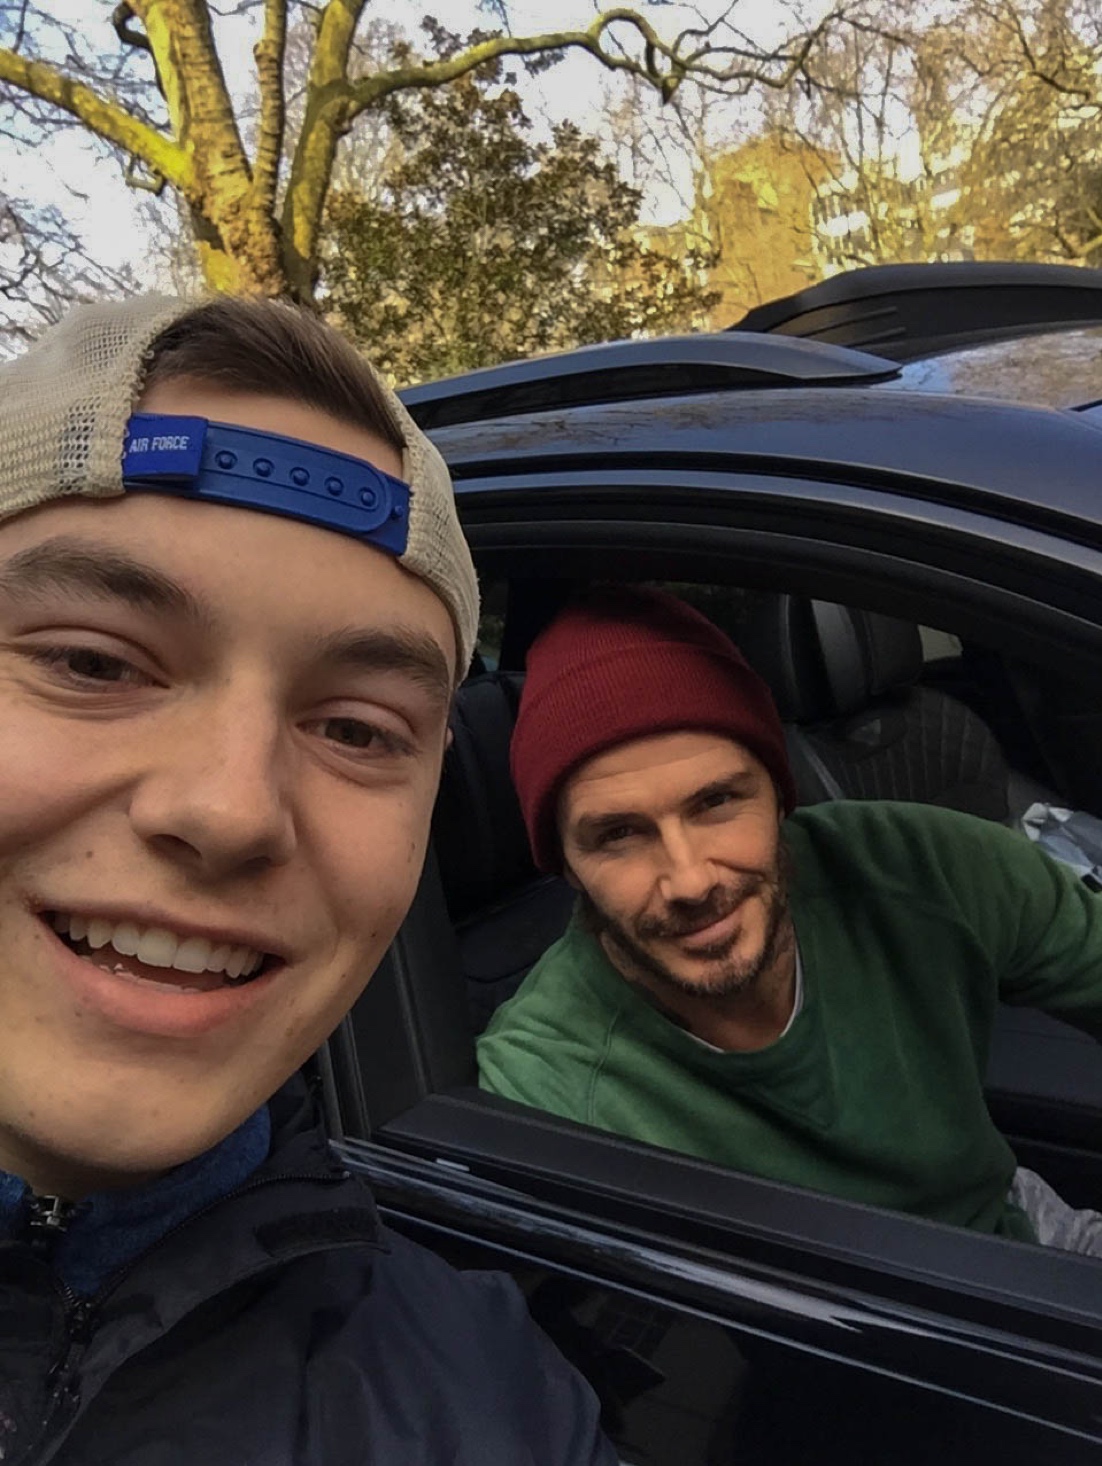 AIFS Abroad student in London, England with David Beckham